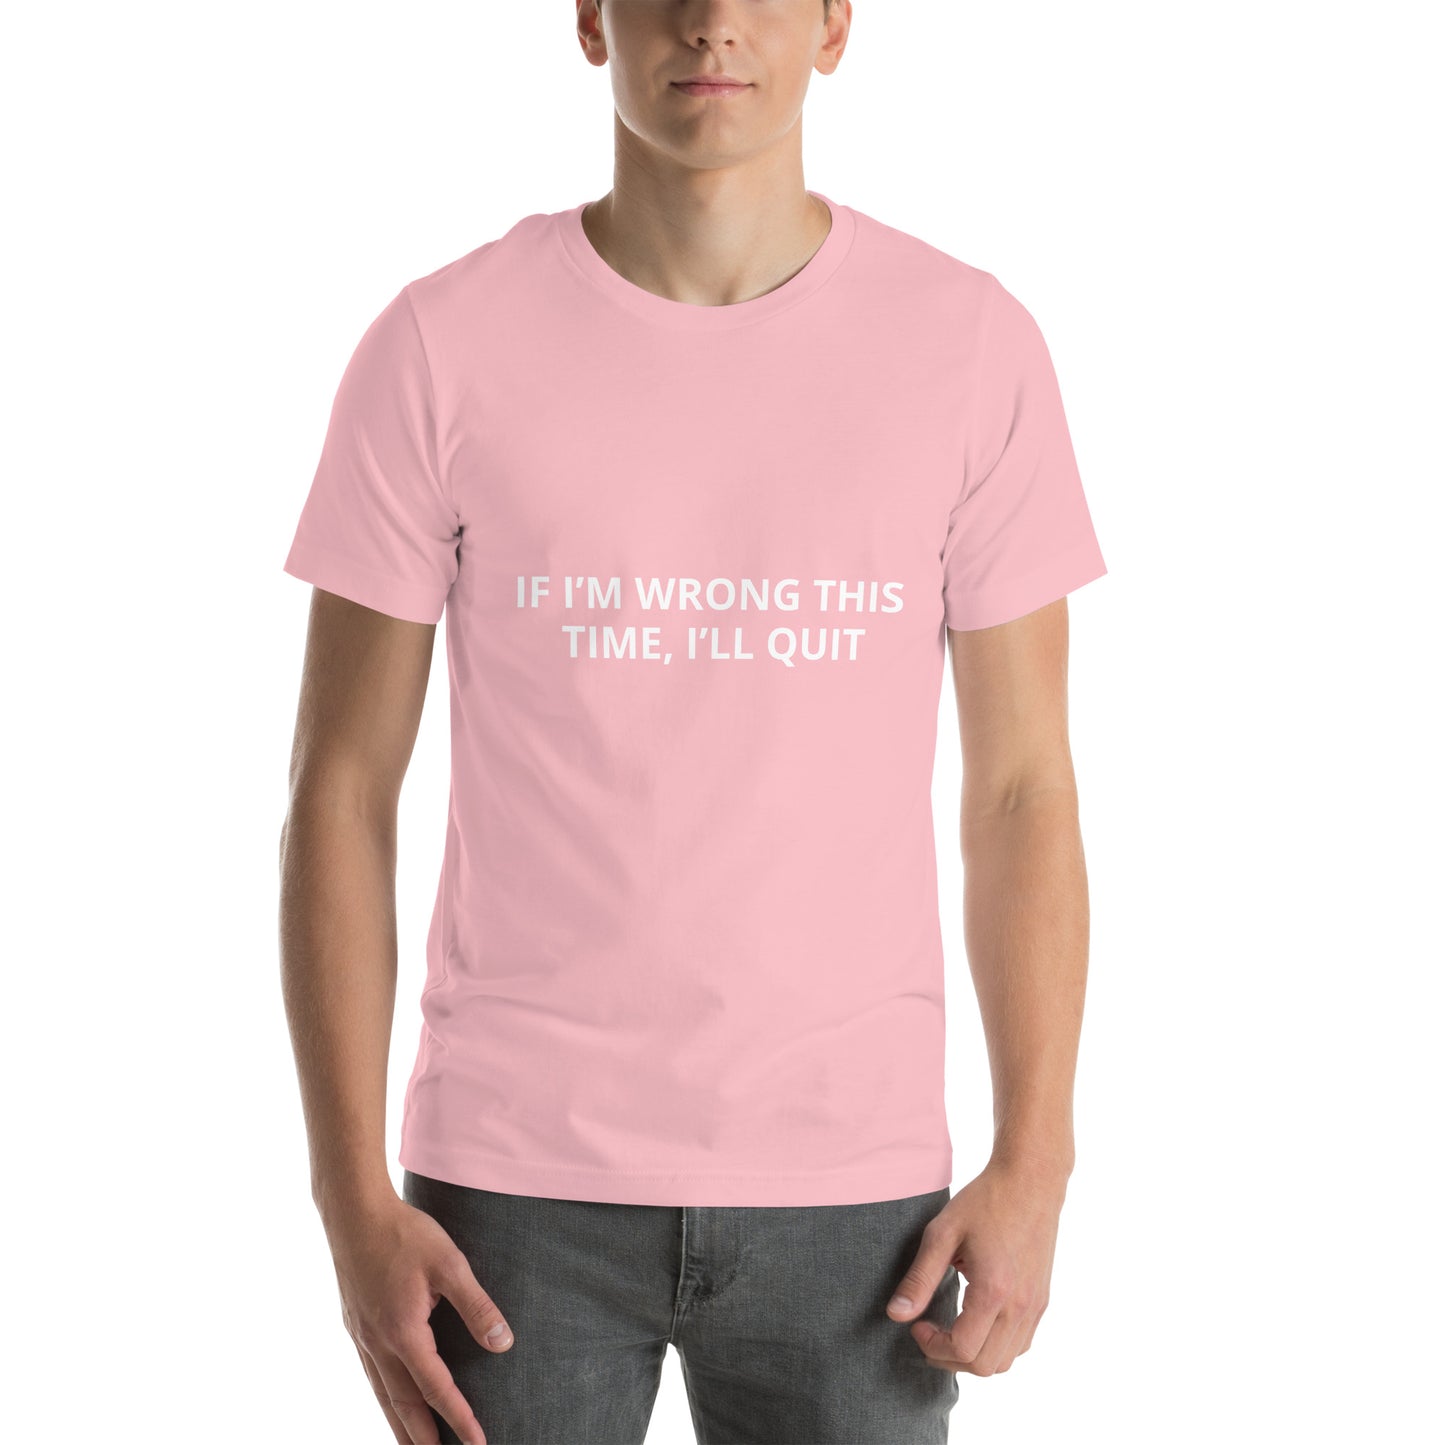 IF I’M WRONG THIS TIME, I’LL QUIT  Unisex t-shirt